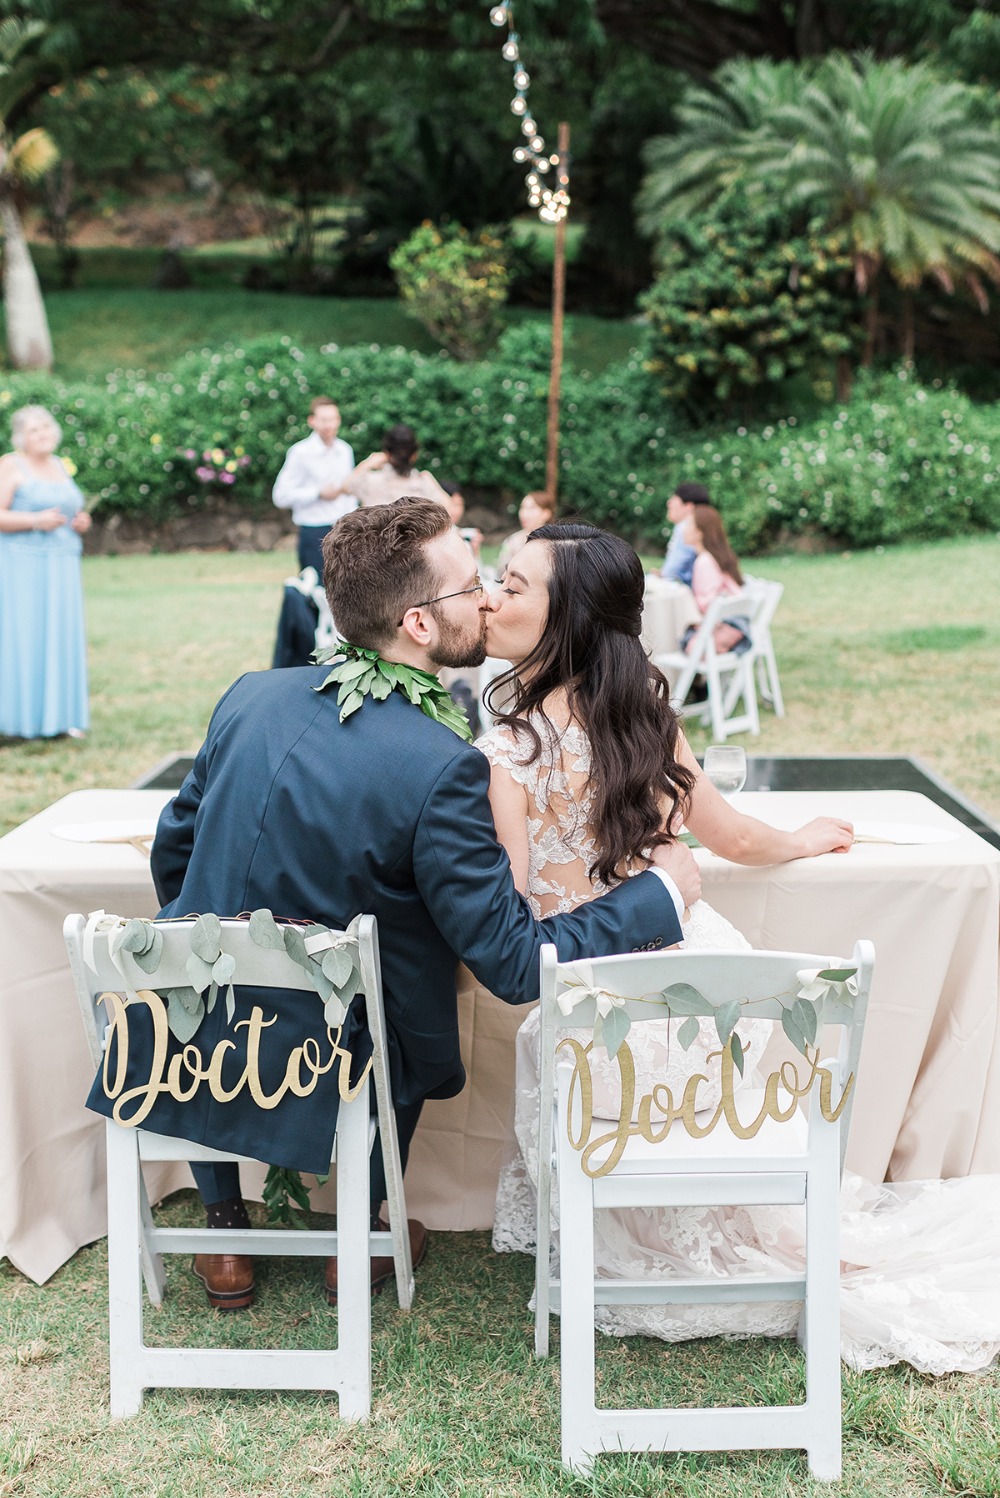 doctor doctor wedding seat signs